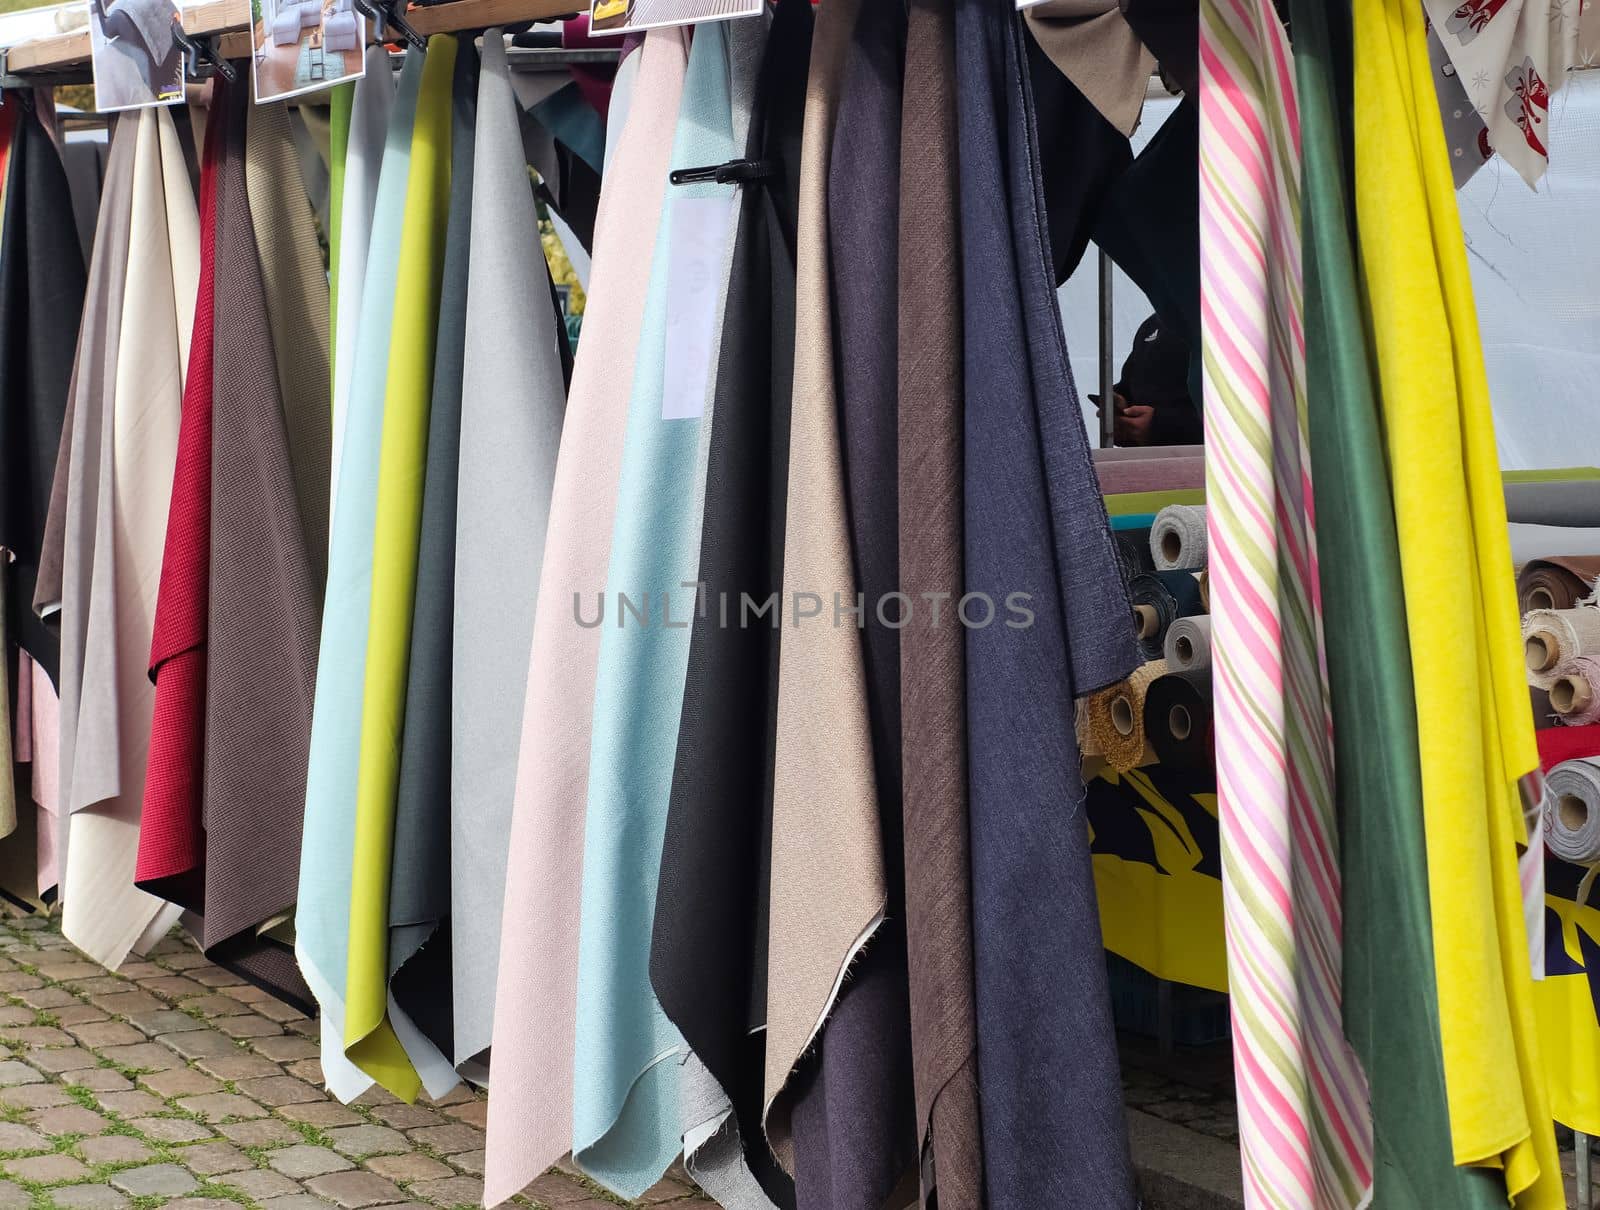 Samples of cloth and fabrics in different colors found at a fabrics market in Germany by MP_foto71